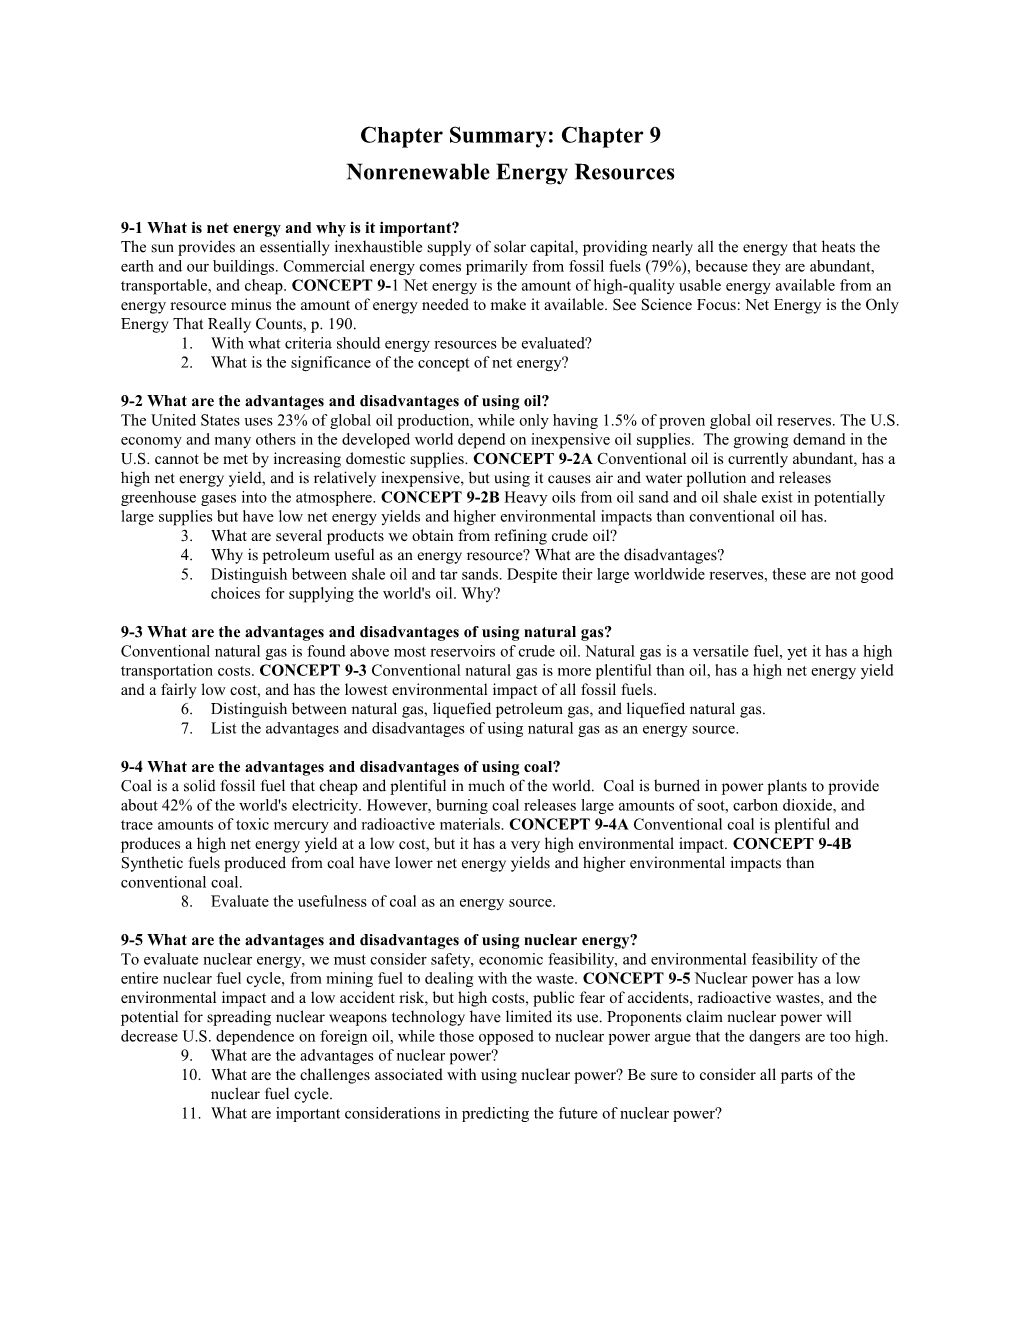 9-1 What Is Net Energy and Why Is It Important?